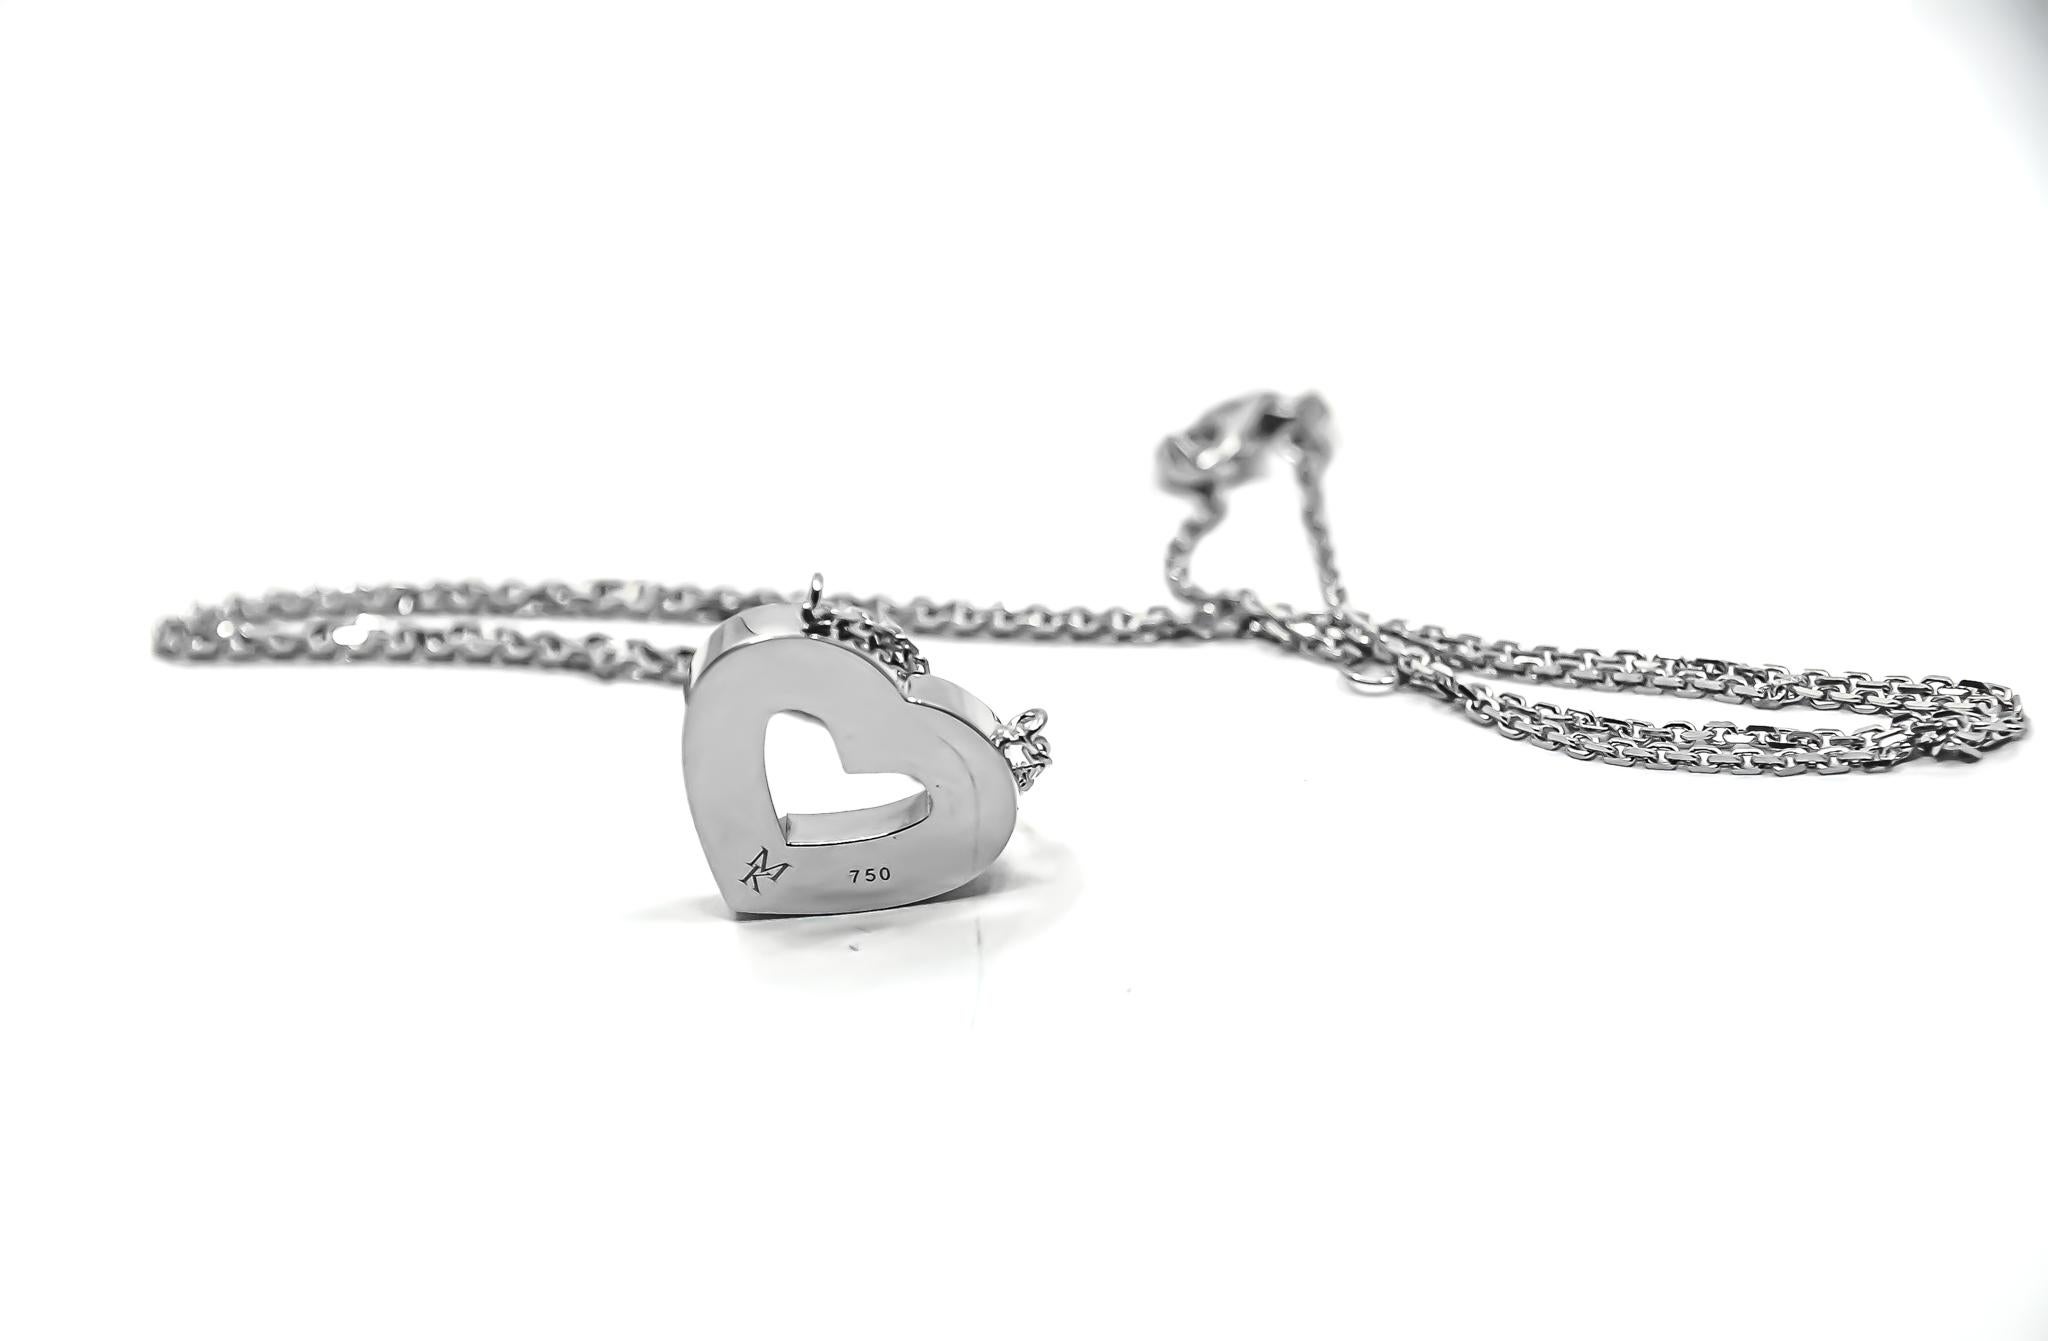 18kt solid white gold pendant necklace by Mohamad Kamra from the Heart Collection.

